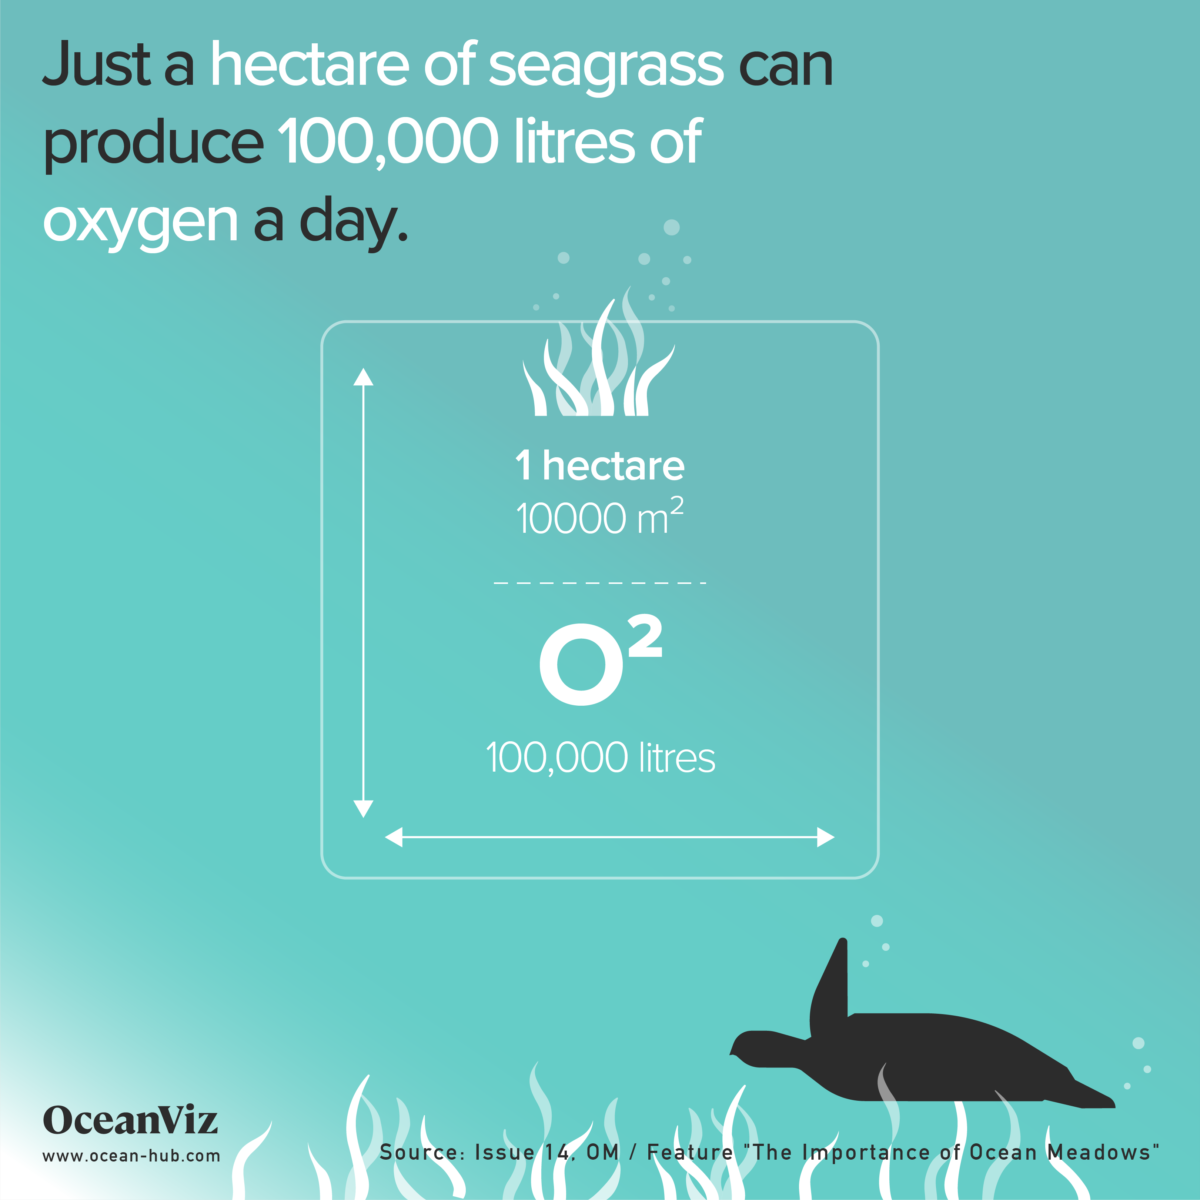 Hectare if seagrass